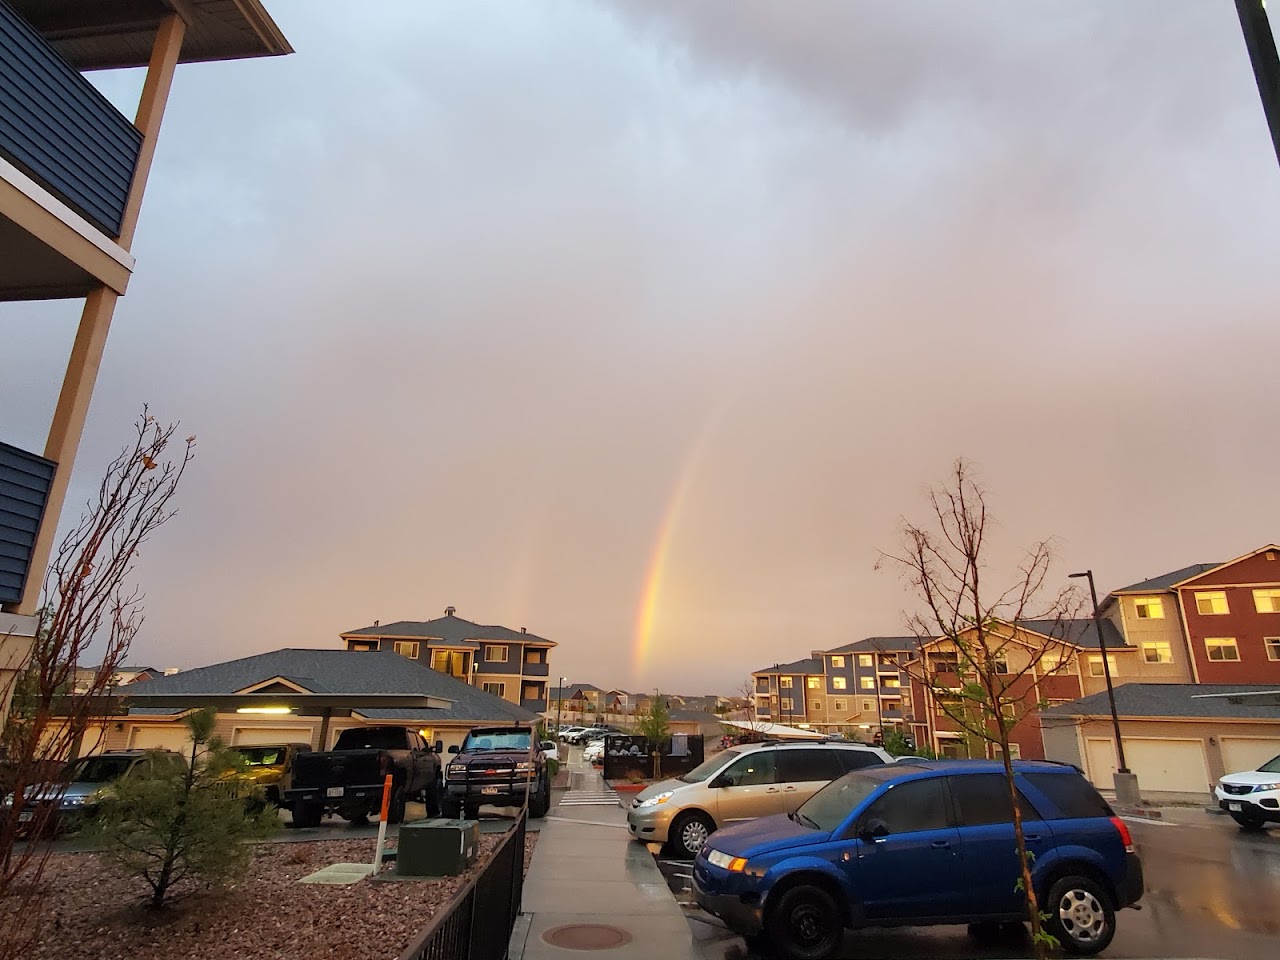 Photo of COPPER RANGE APARTMENTS at 7535 COPPER RANGE HEIGHTS COLORADO SPRINGS, CO 80903